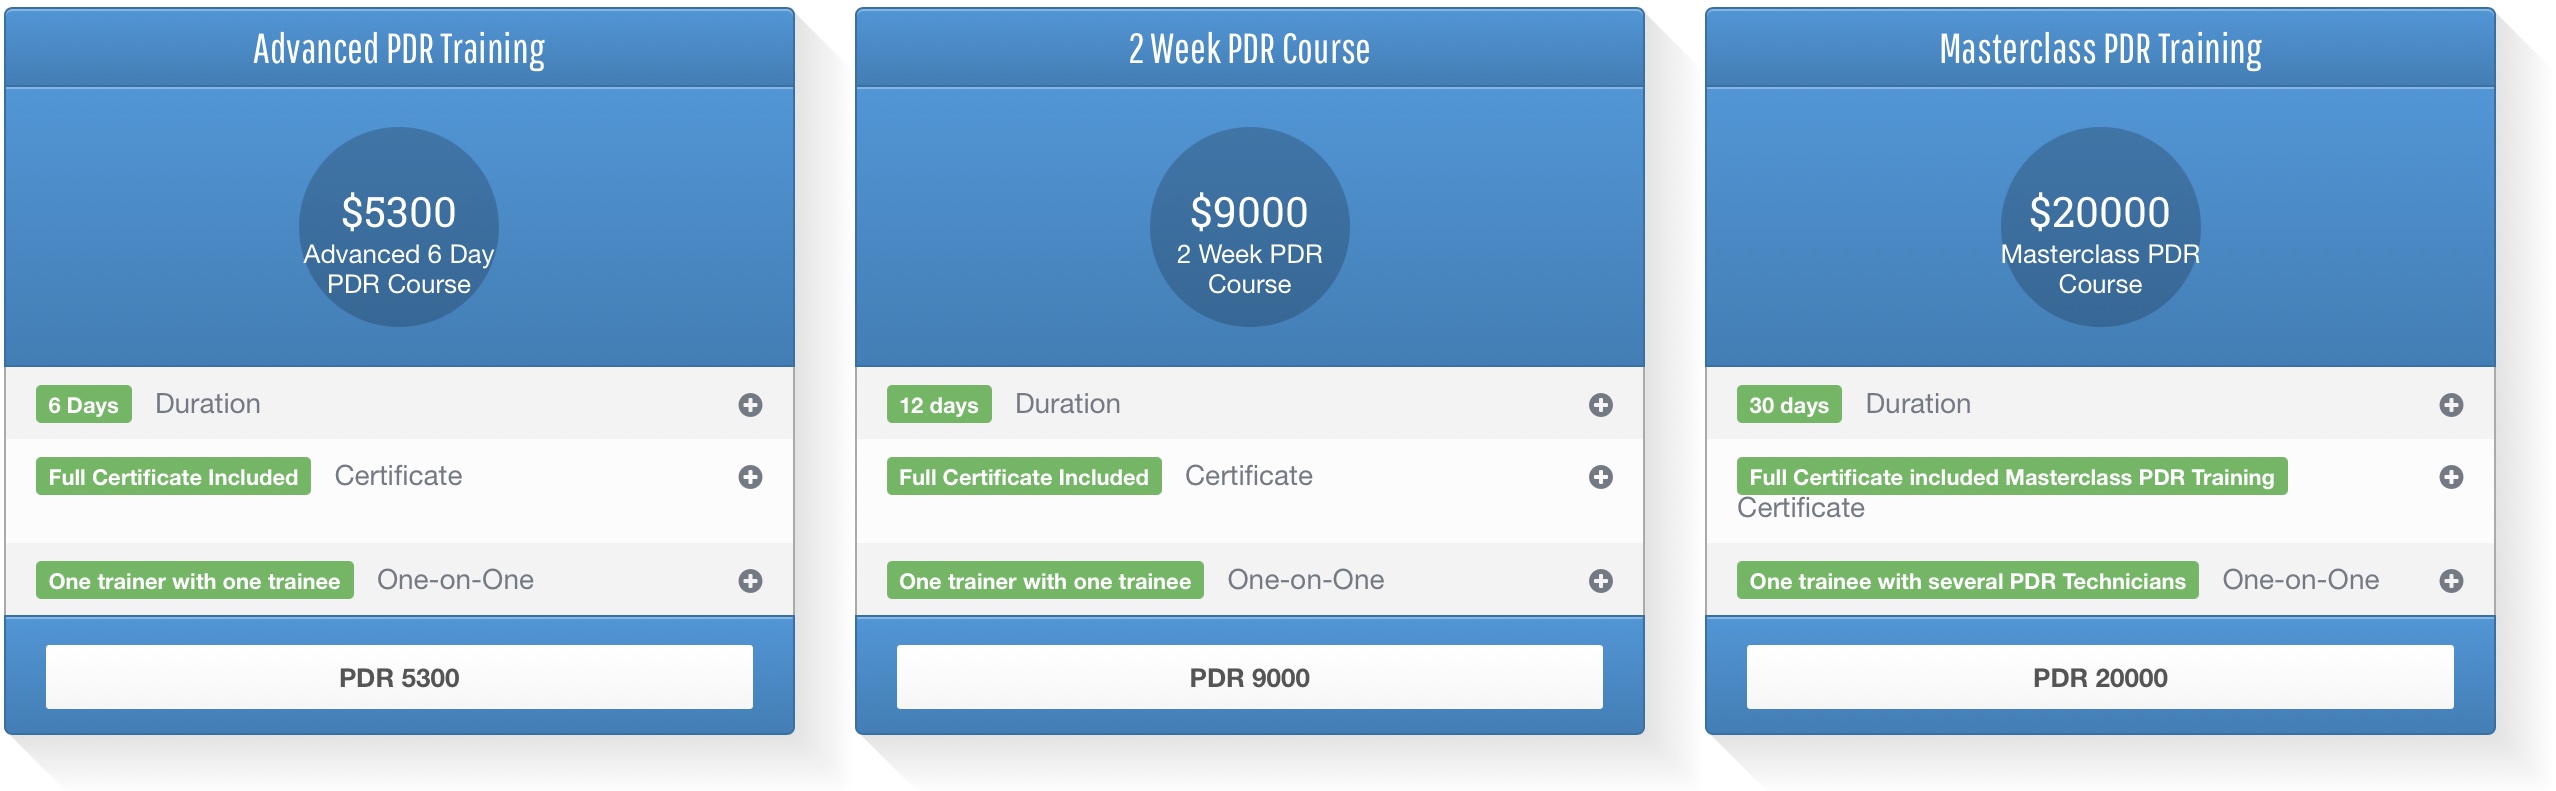 Teaser PDR One-on-One Courses